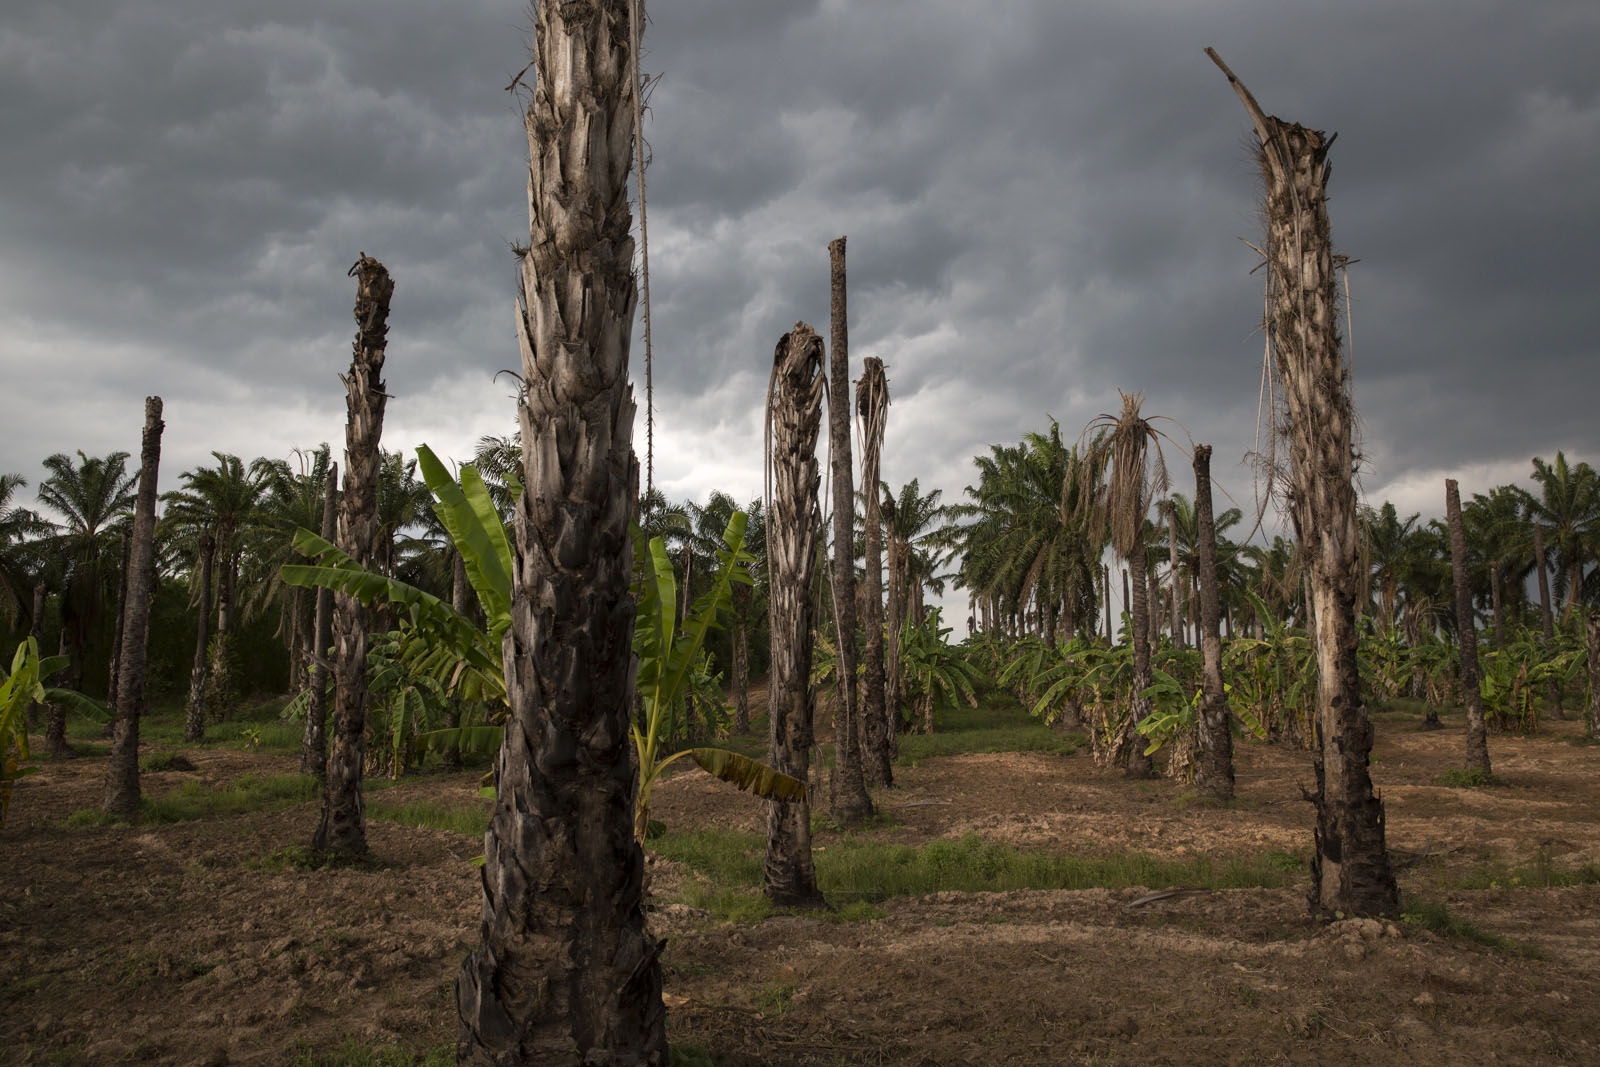 A VILLAGE UNDER SIEGE - A storm approaches an area of dead palm oil trees within...